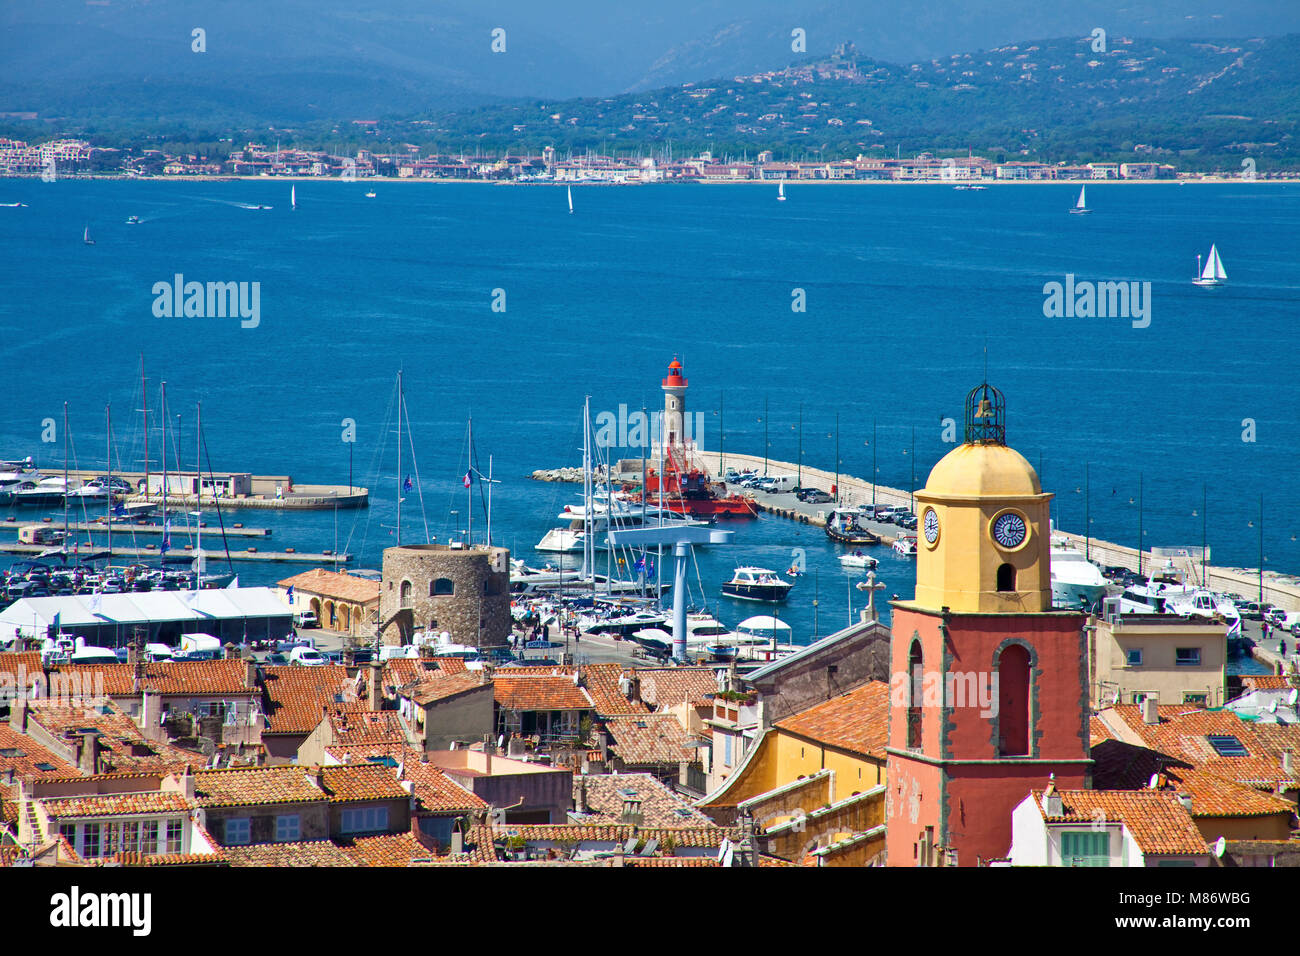 View over Saint-Tropez and the gulf of Saint-Tropez, french riviera, South France, Cote d'Azur, France, Europe Stock Photo